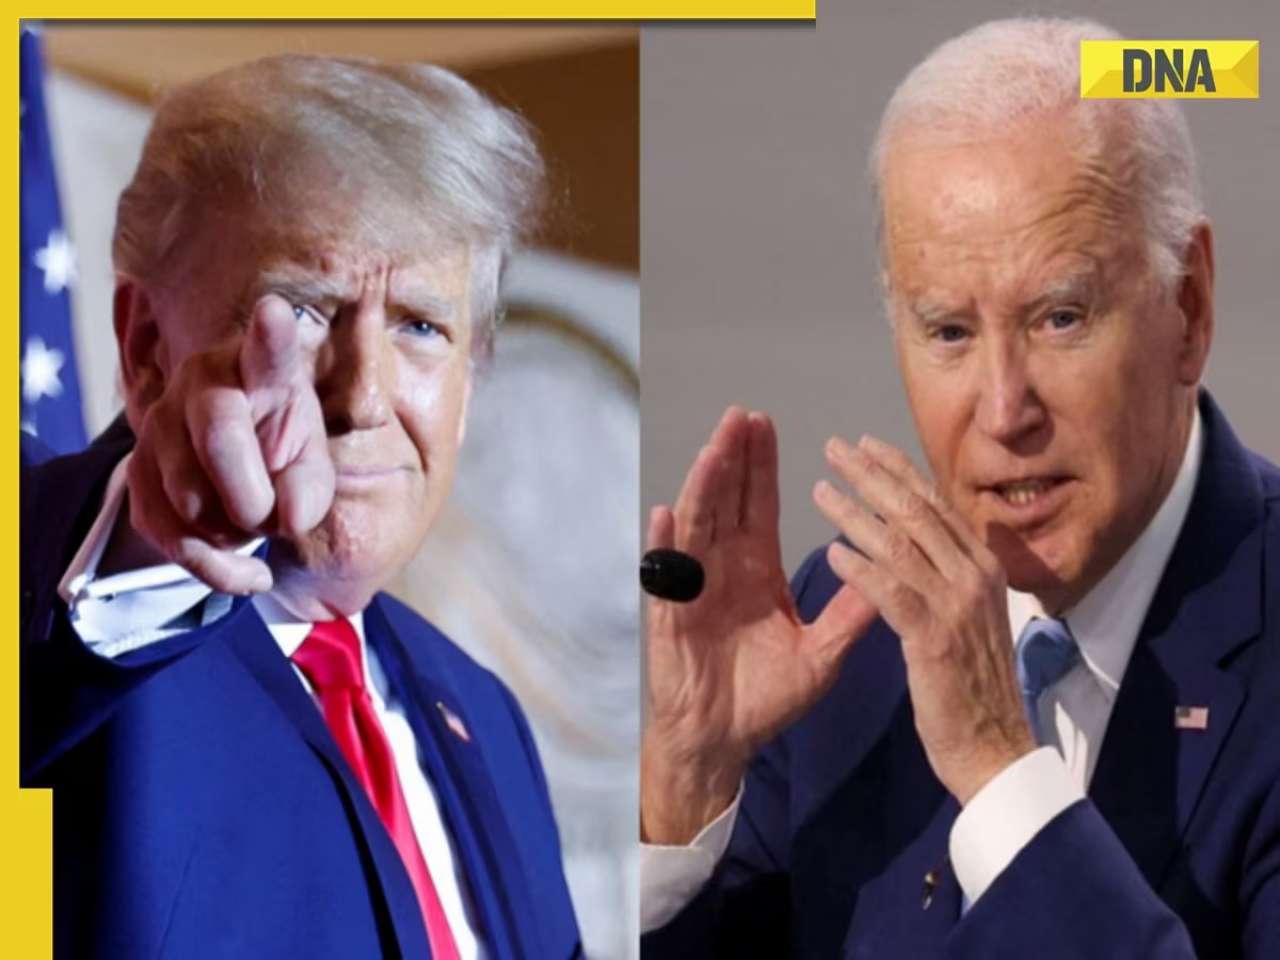 US: Joe Biden, Donald Trump clinch presidential nominations, set for first presidential rematch since 1956